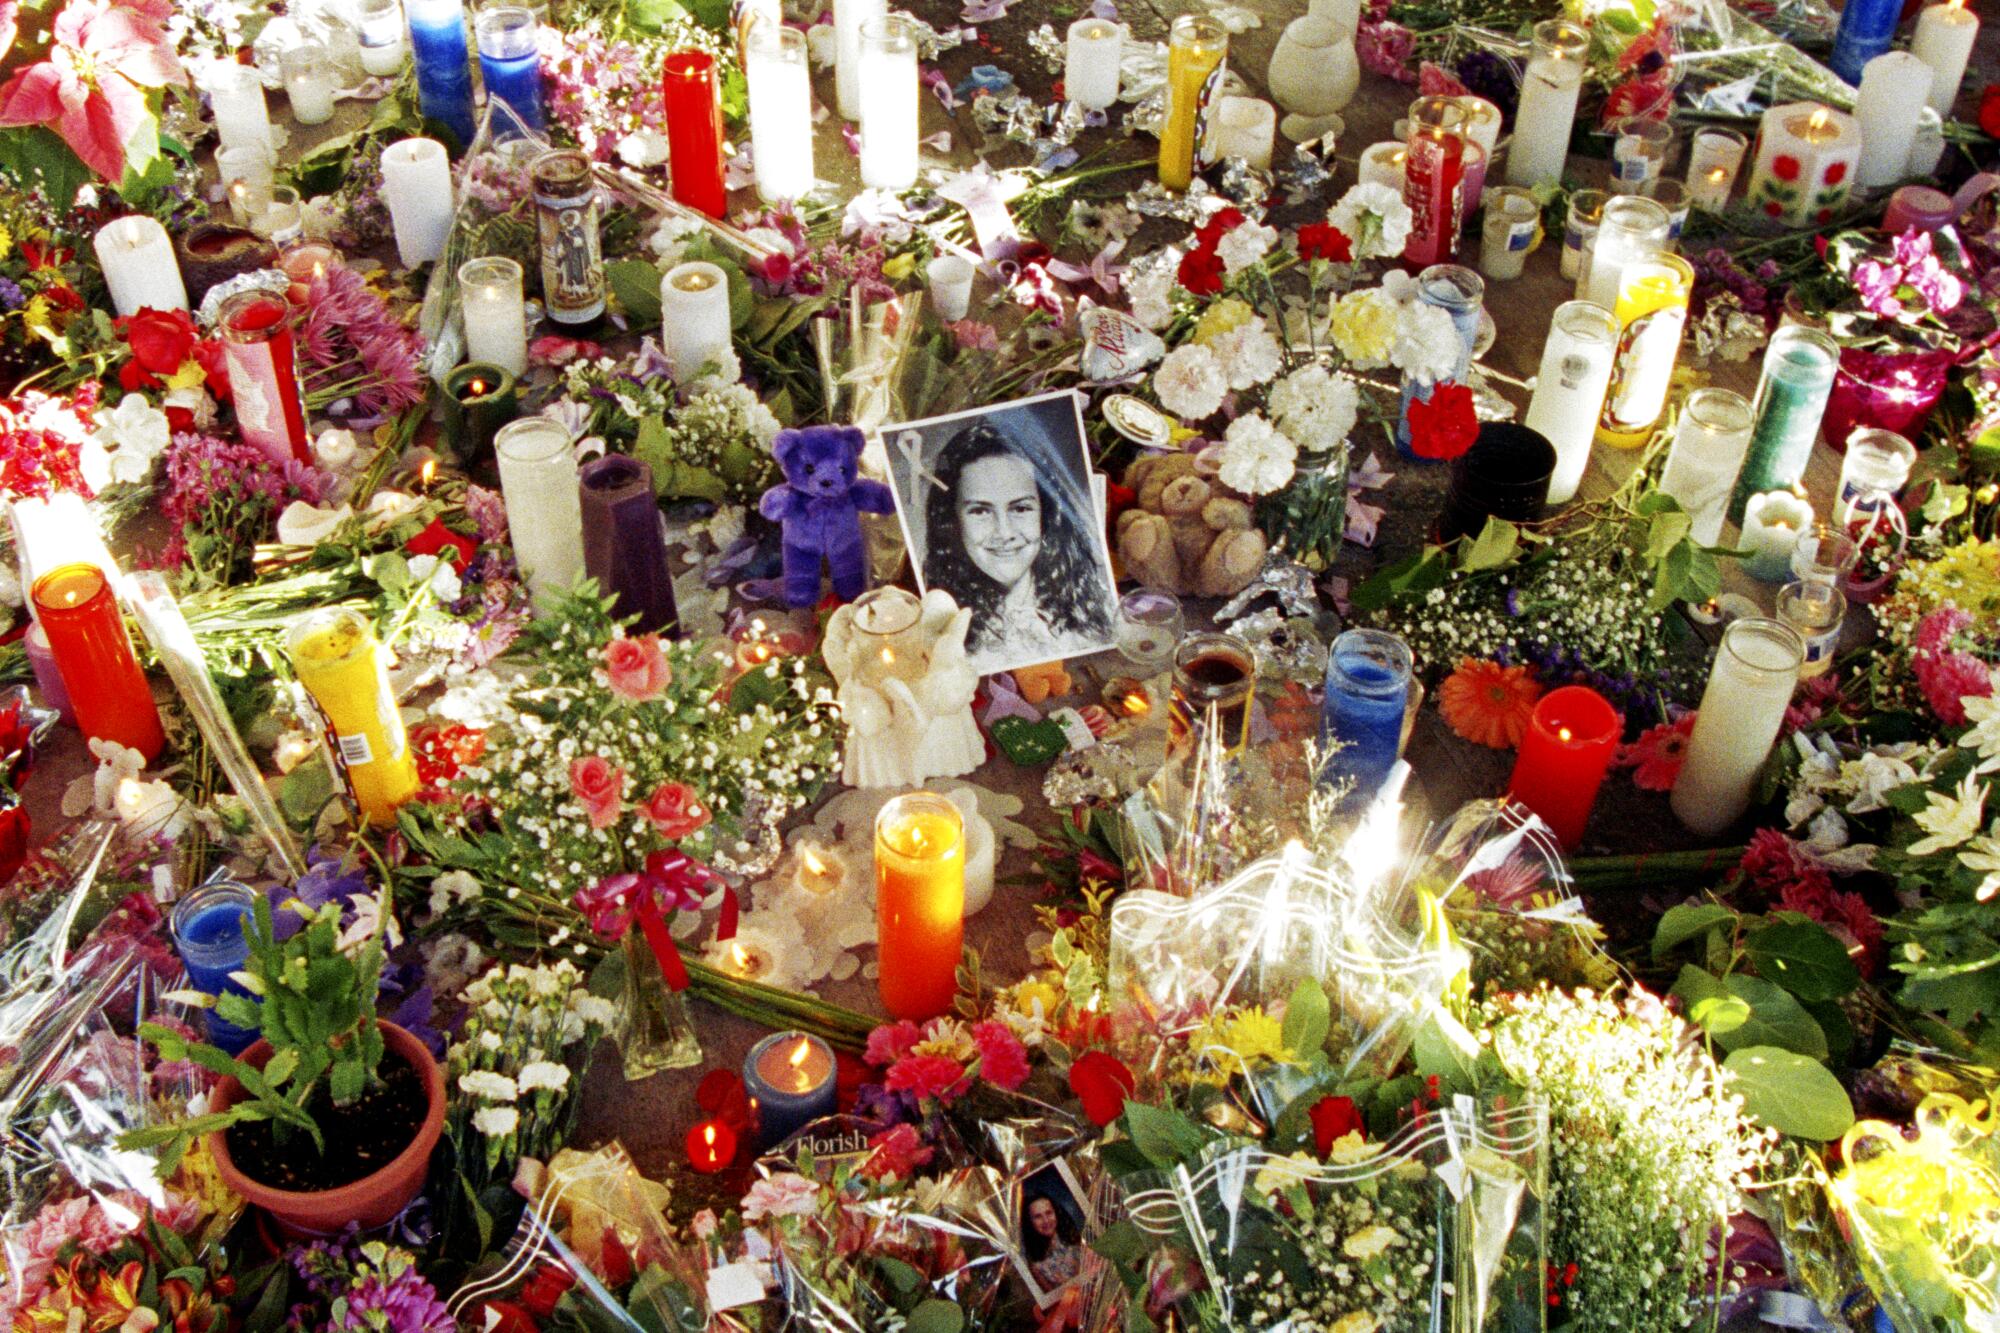 Flowers and candles surrounding a portrait of a girl